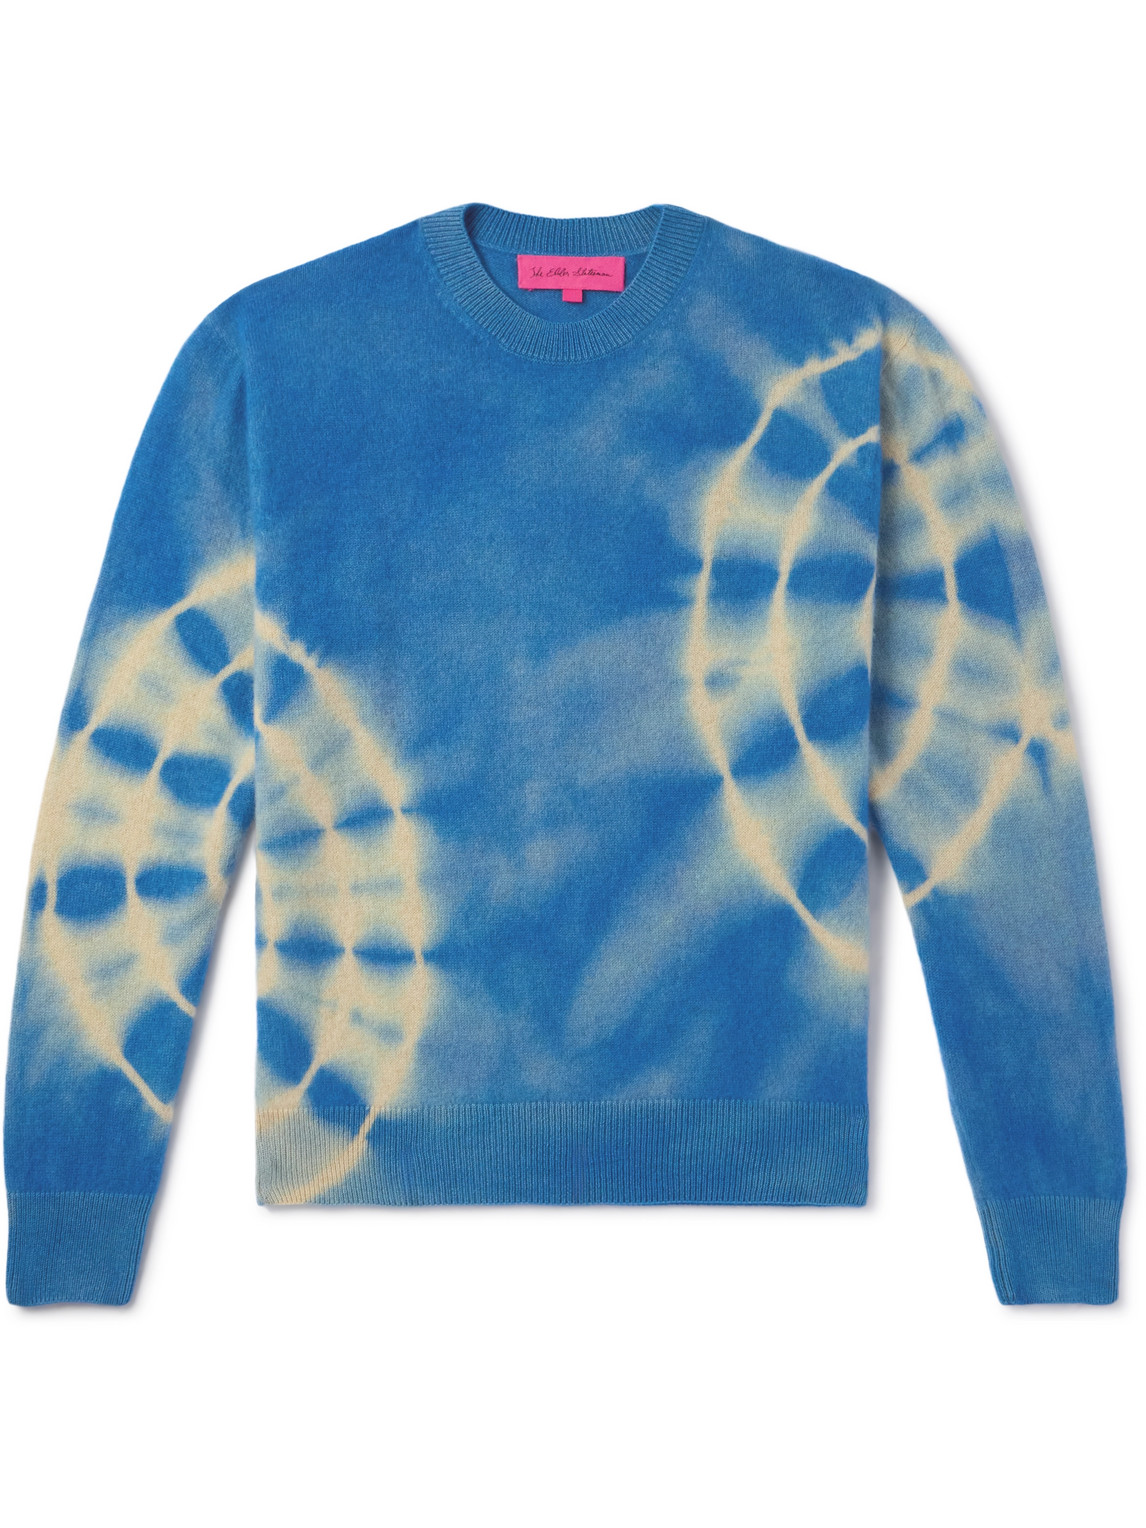 Spiral City Tranquility Tie-Dyed Cashmere Sweater